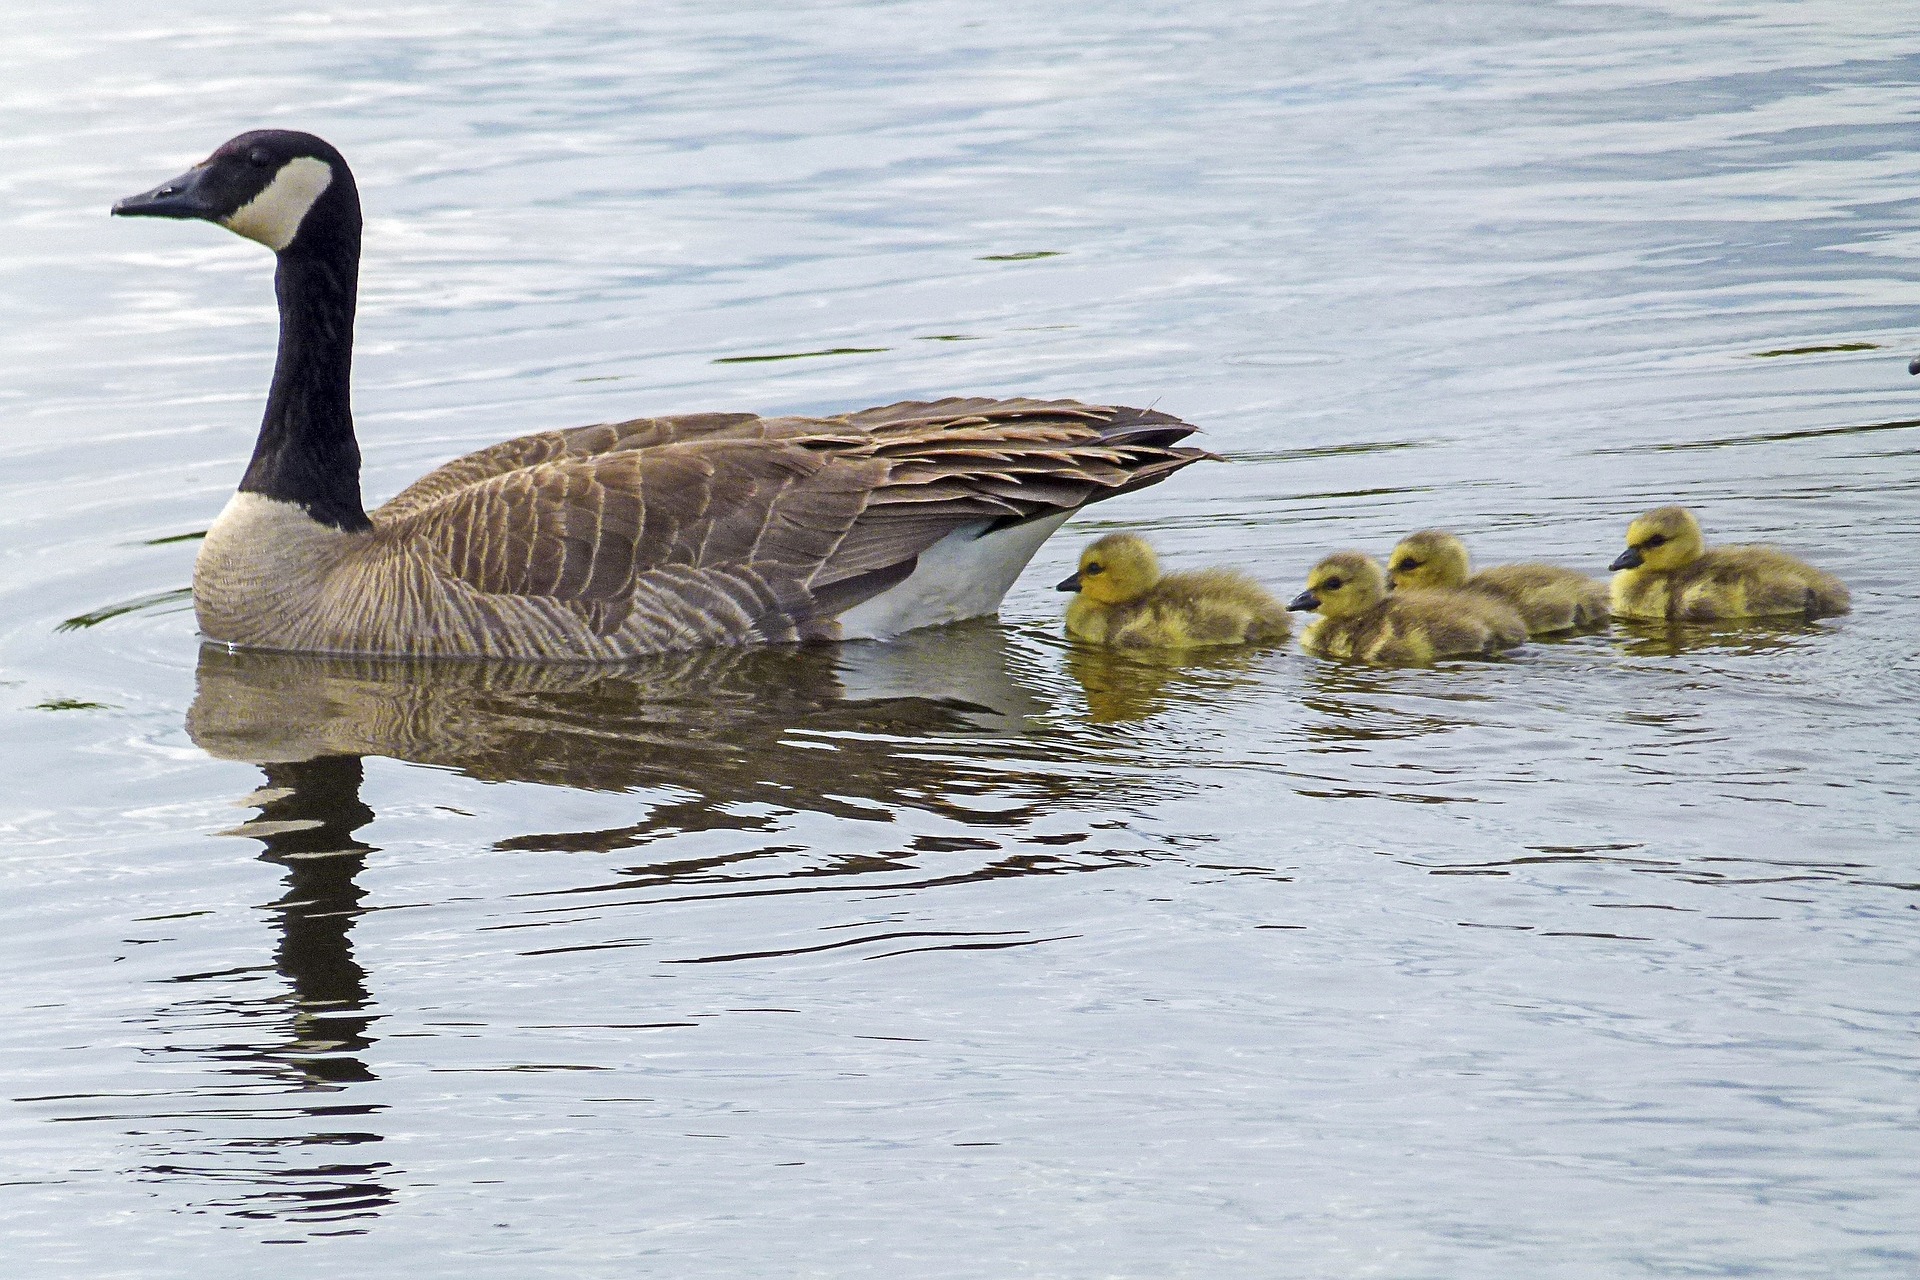 Canada goose followed by goslings, swimming on water